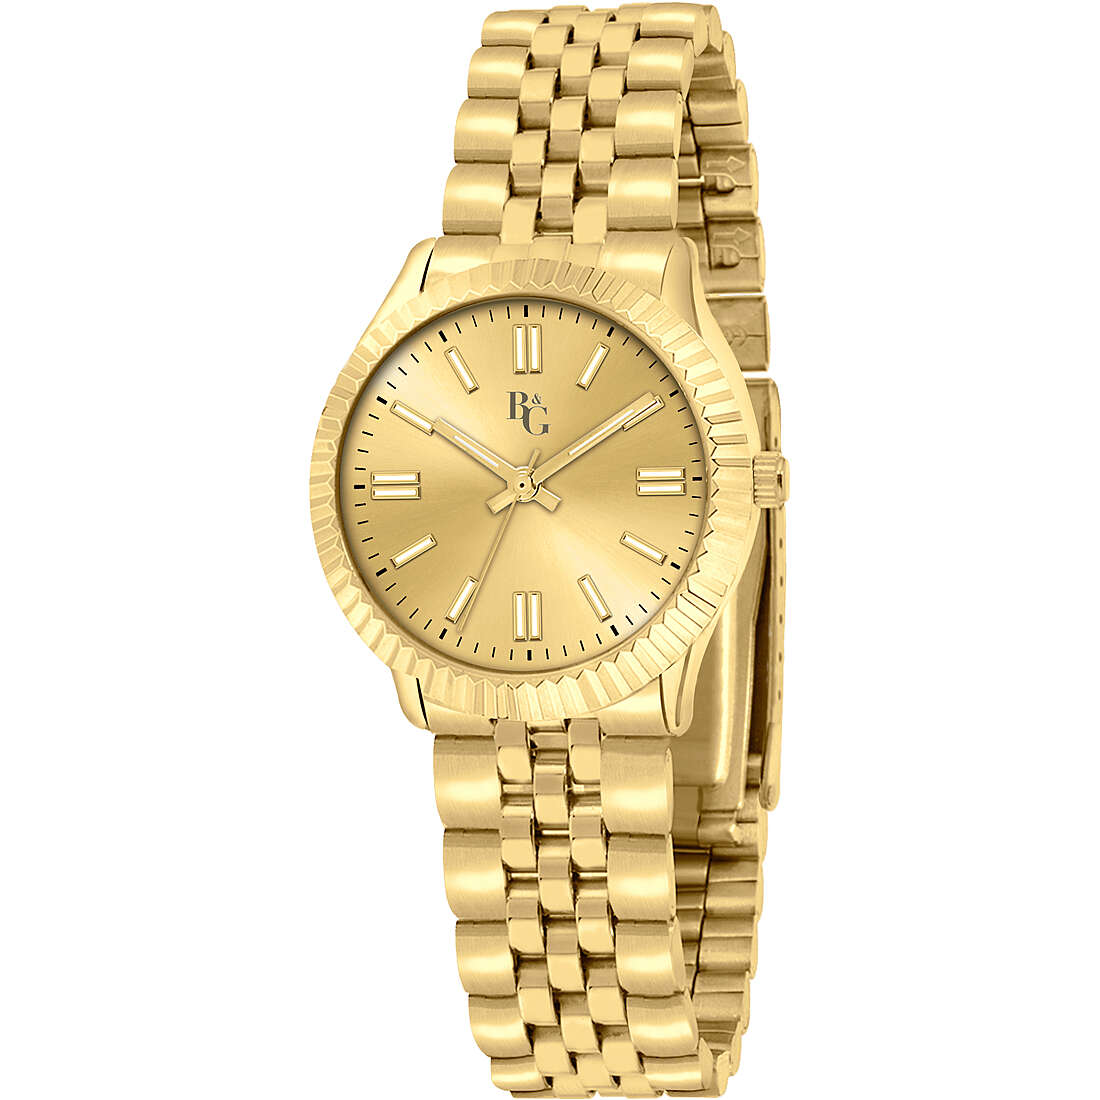 only time watch Metal Gold dial woman Luxury R3853241519